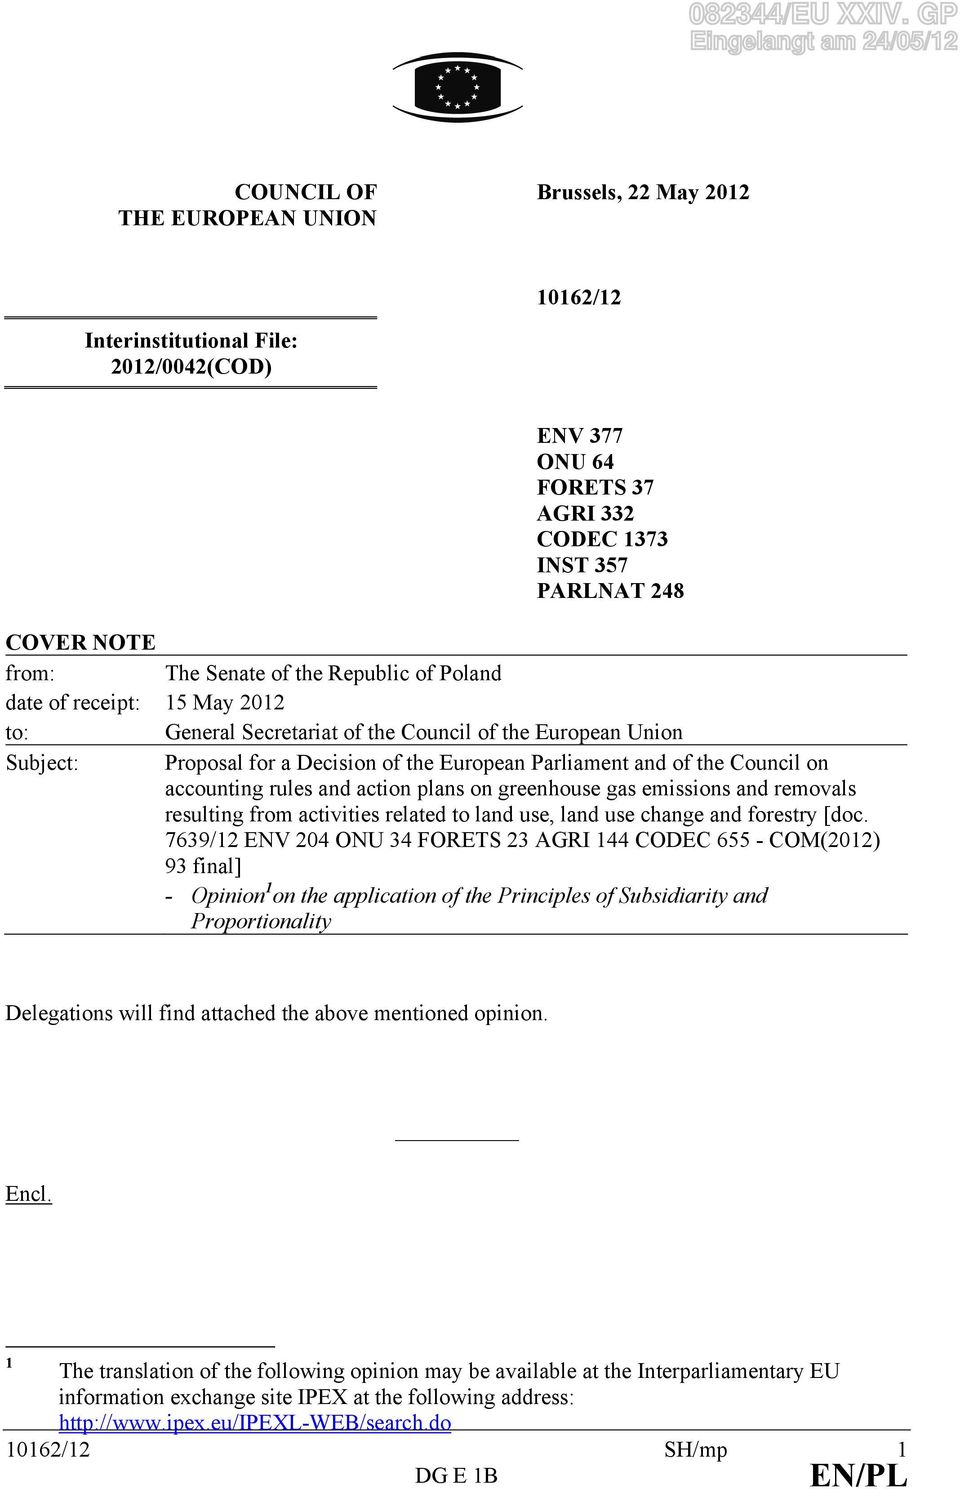 NOTE from: The Senate of the Republic of Poland date of receipt: 15 May 2012 to: General Secretariat of the Council of the European Union Subject: Proposal for a Decision of the European Parliament